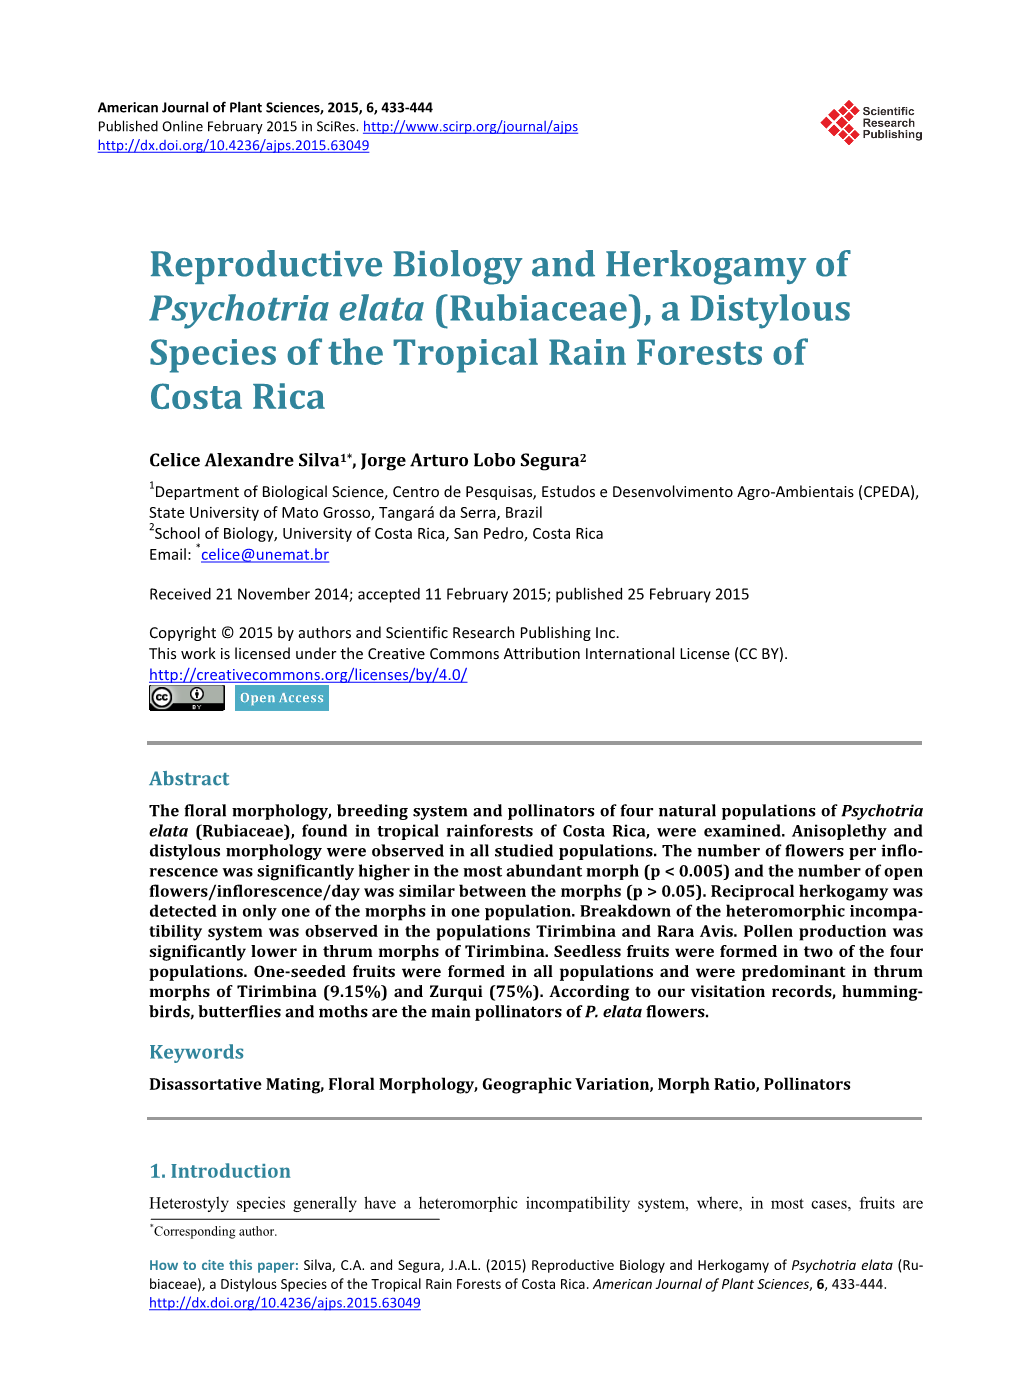 Reproductive Biology and Herkogamy of Psychotria Elata (Rubiaceae), a Distylous Species of the Tropical Rain Forests of Costa Rica